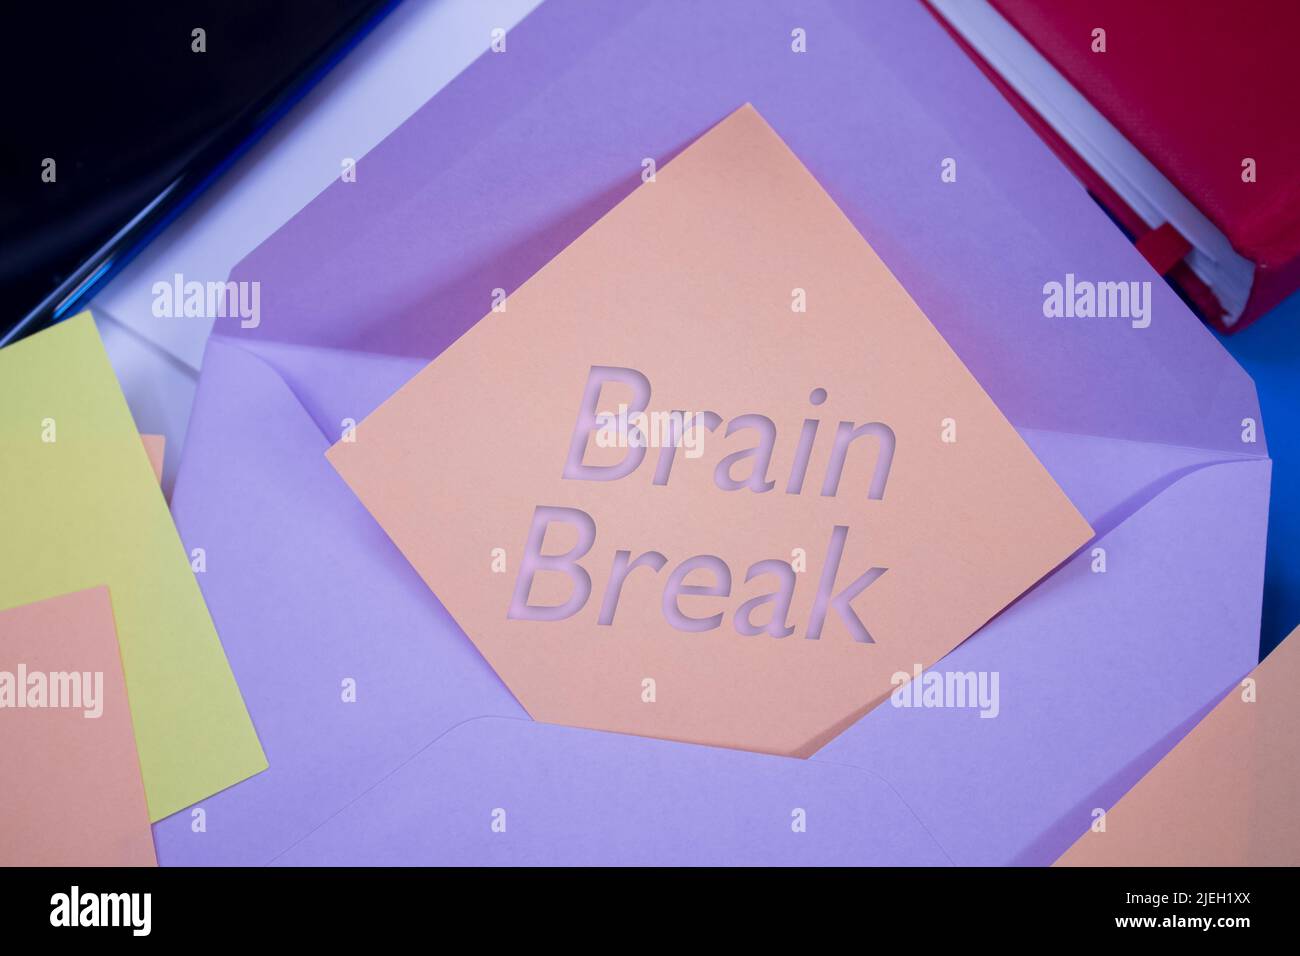 Brain Break. Text on adhesive note paper. Event, celebration reminder message. Stock Photo